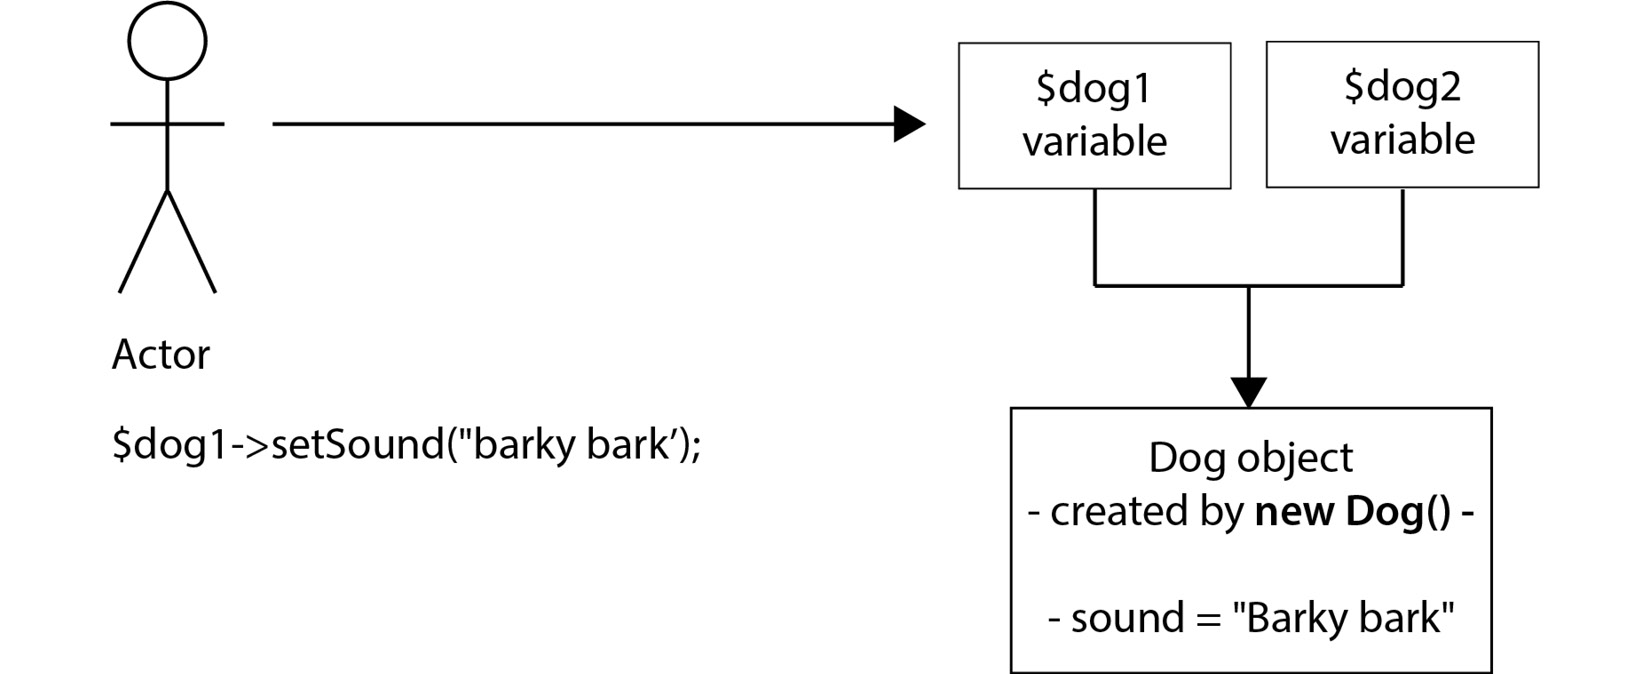 Figure 4.2 – What happens to $dog1’s property also happens to $dog2